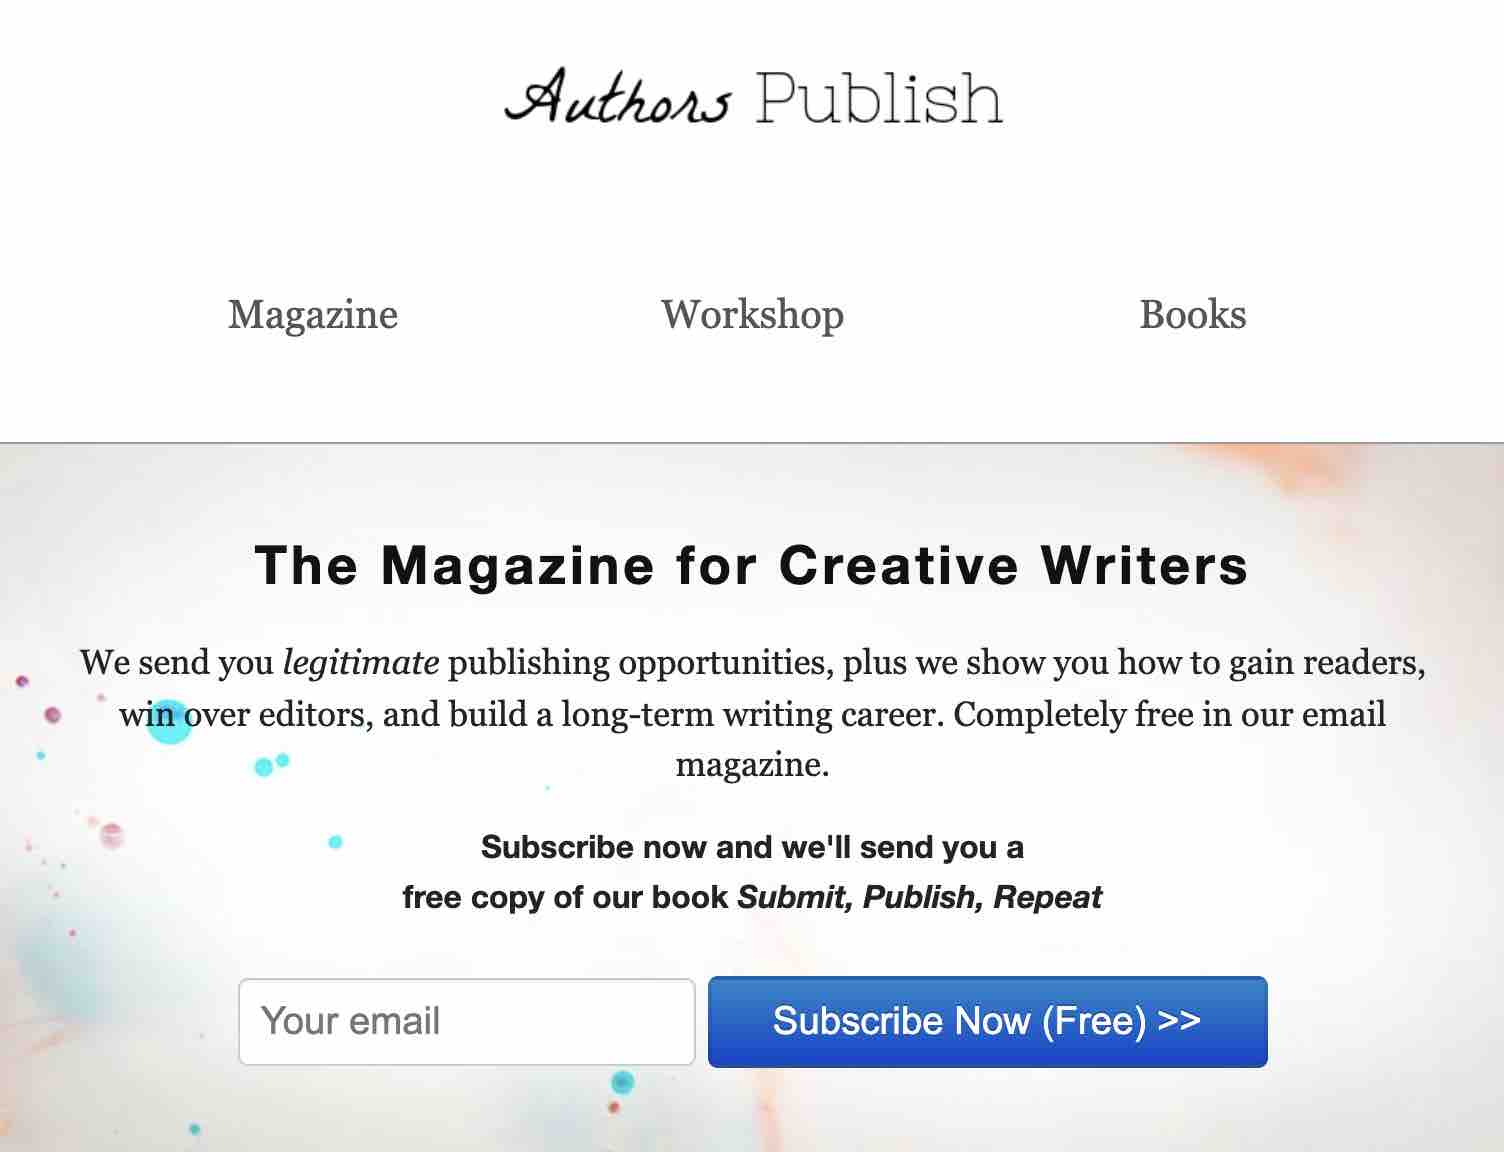 what is freedom with writing author publish